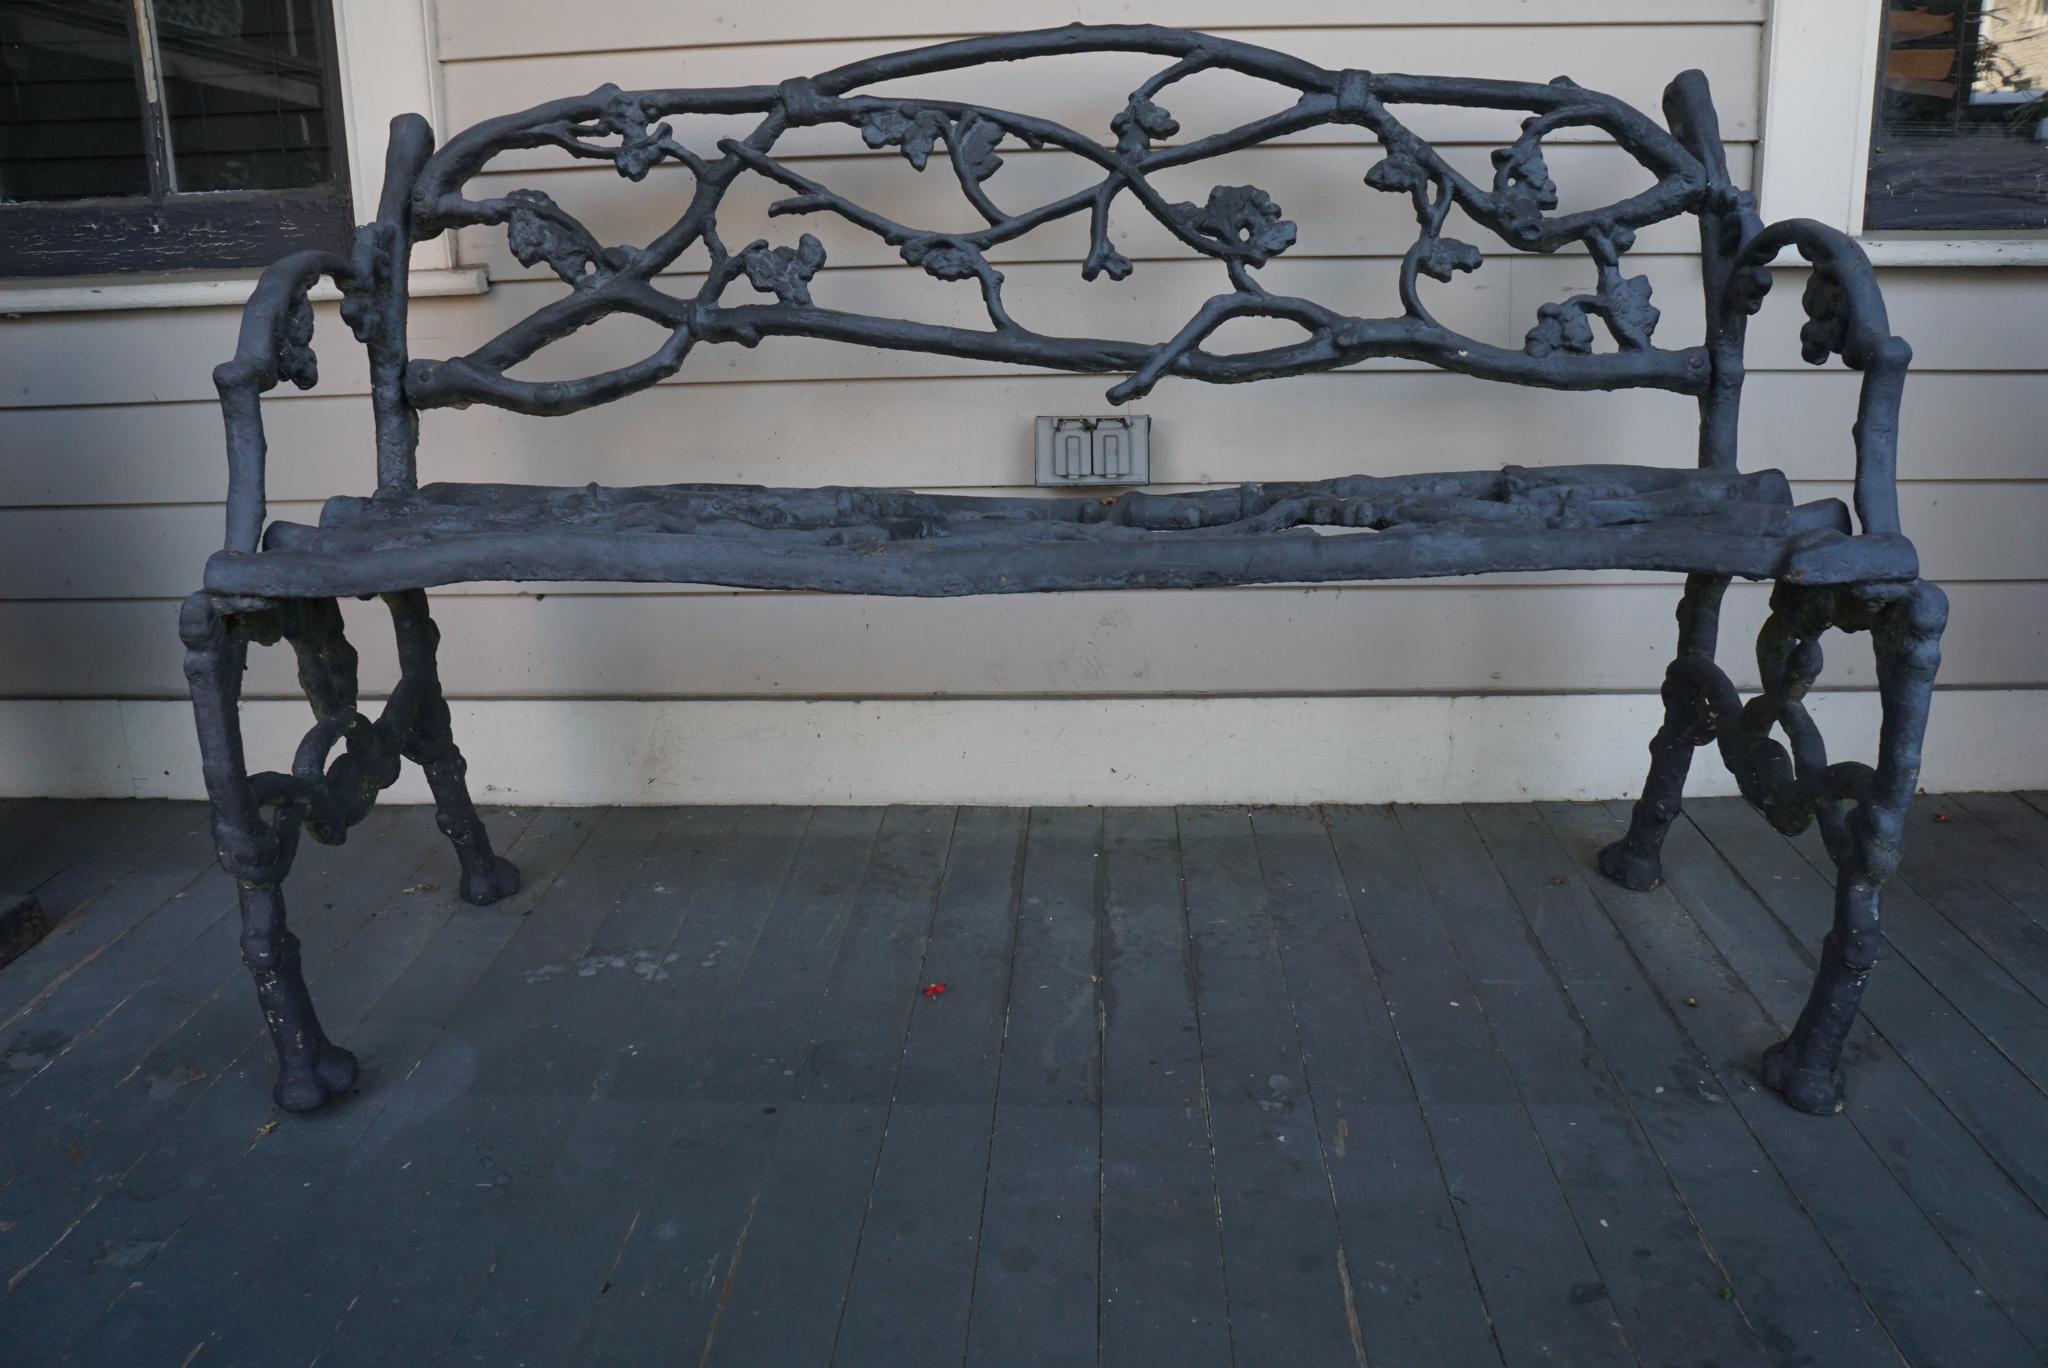 This fine early bench cast between 1830 and 1850 is in a naturalistic twig form covered sparingly with leaves. The bench is a very heavy casting and while simple looking is very detailed and well conceived. Retaining its old surface it is just